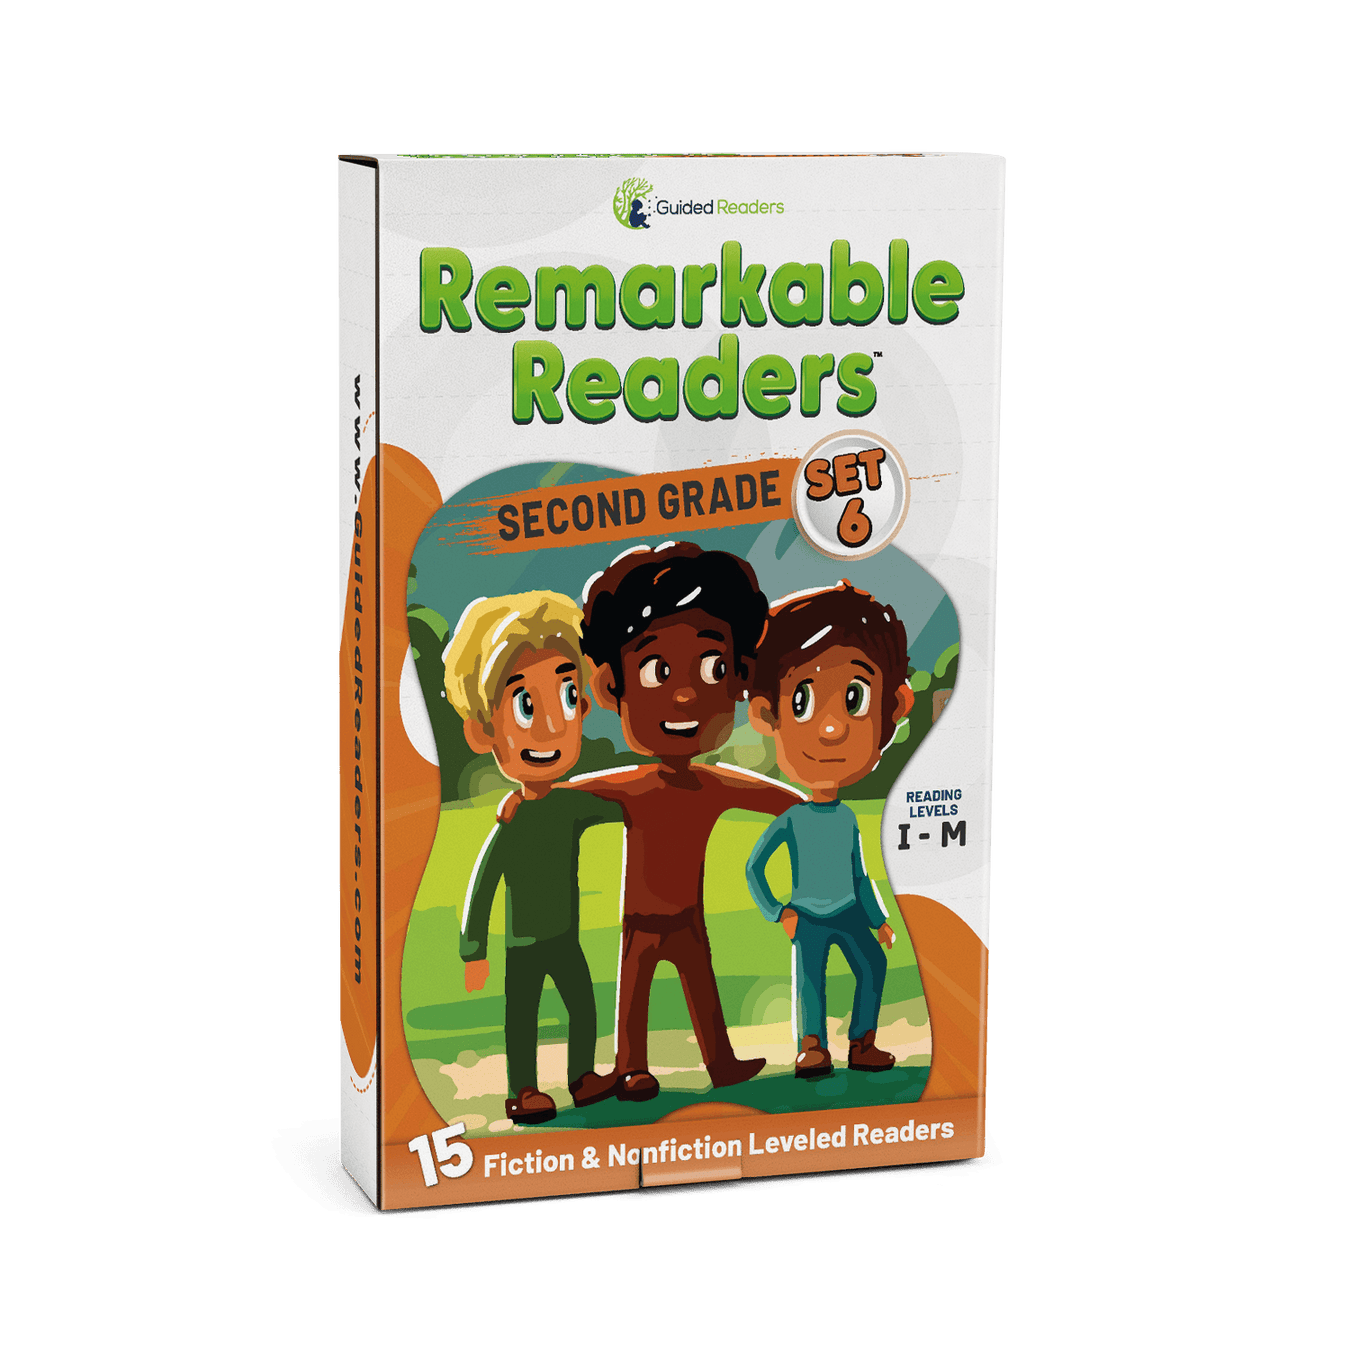 Remarkable Readers Second Graders